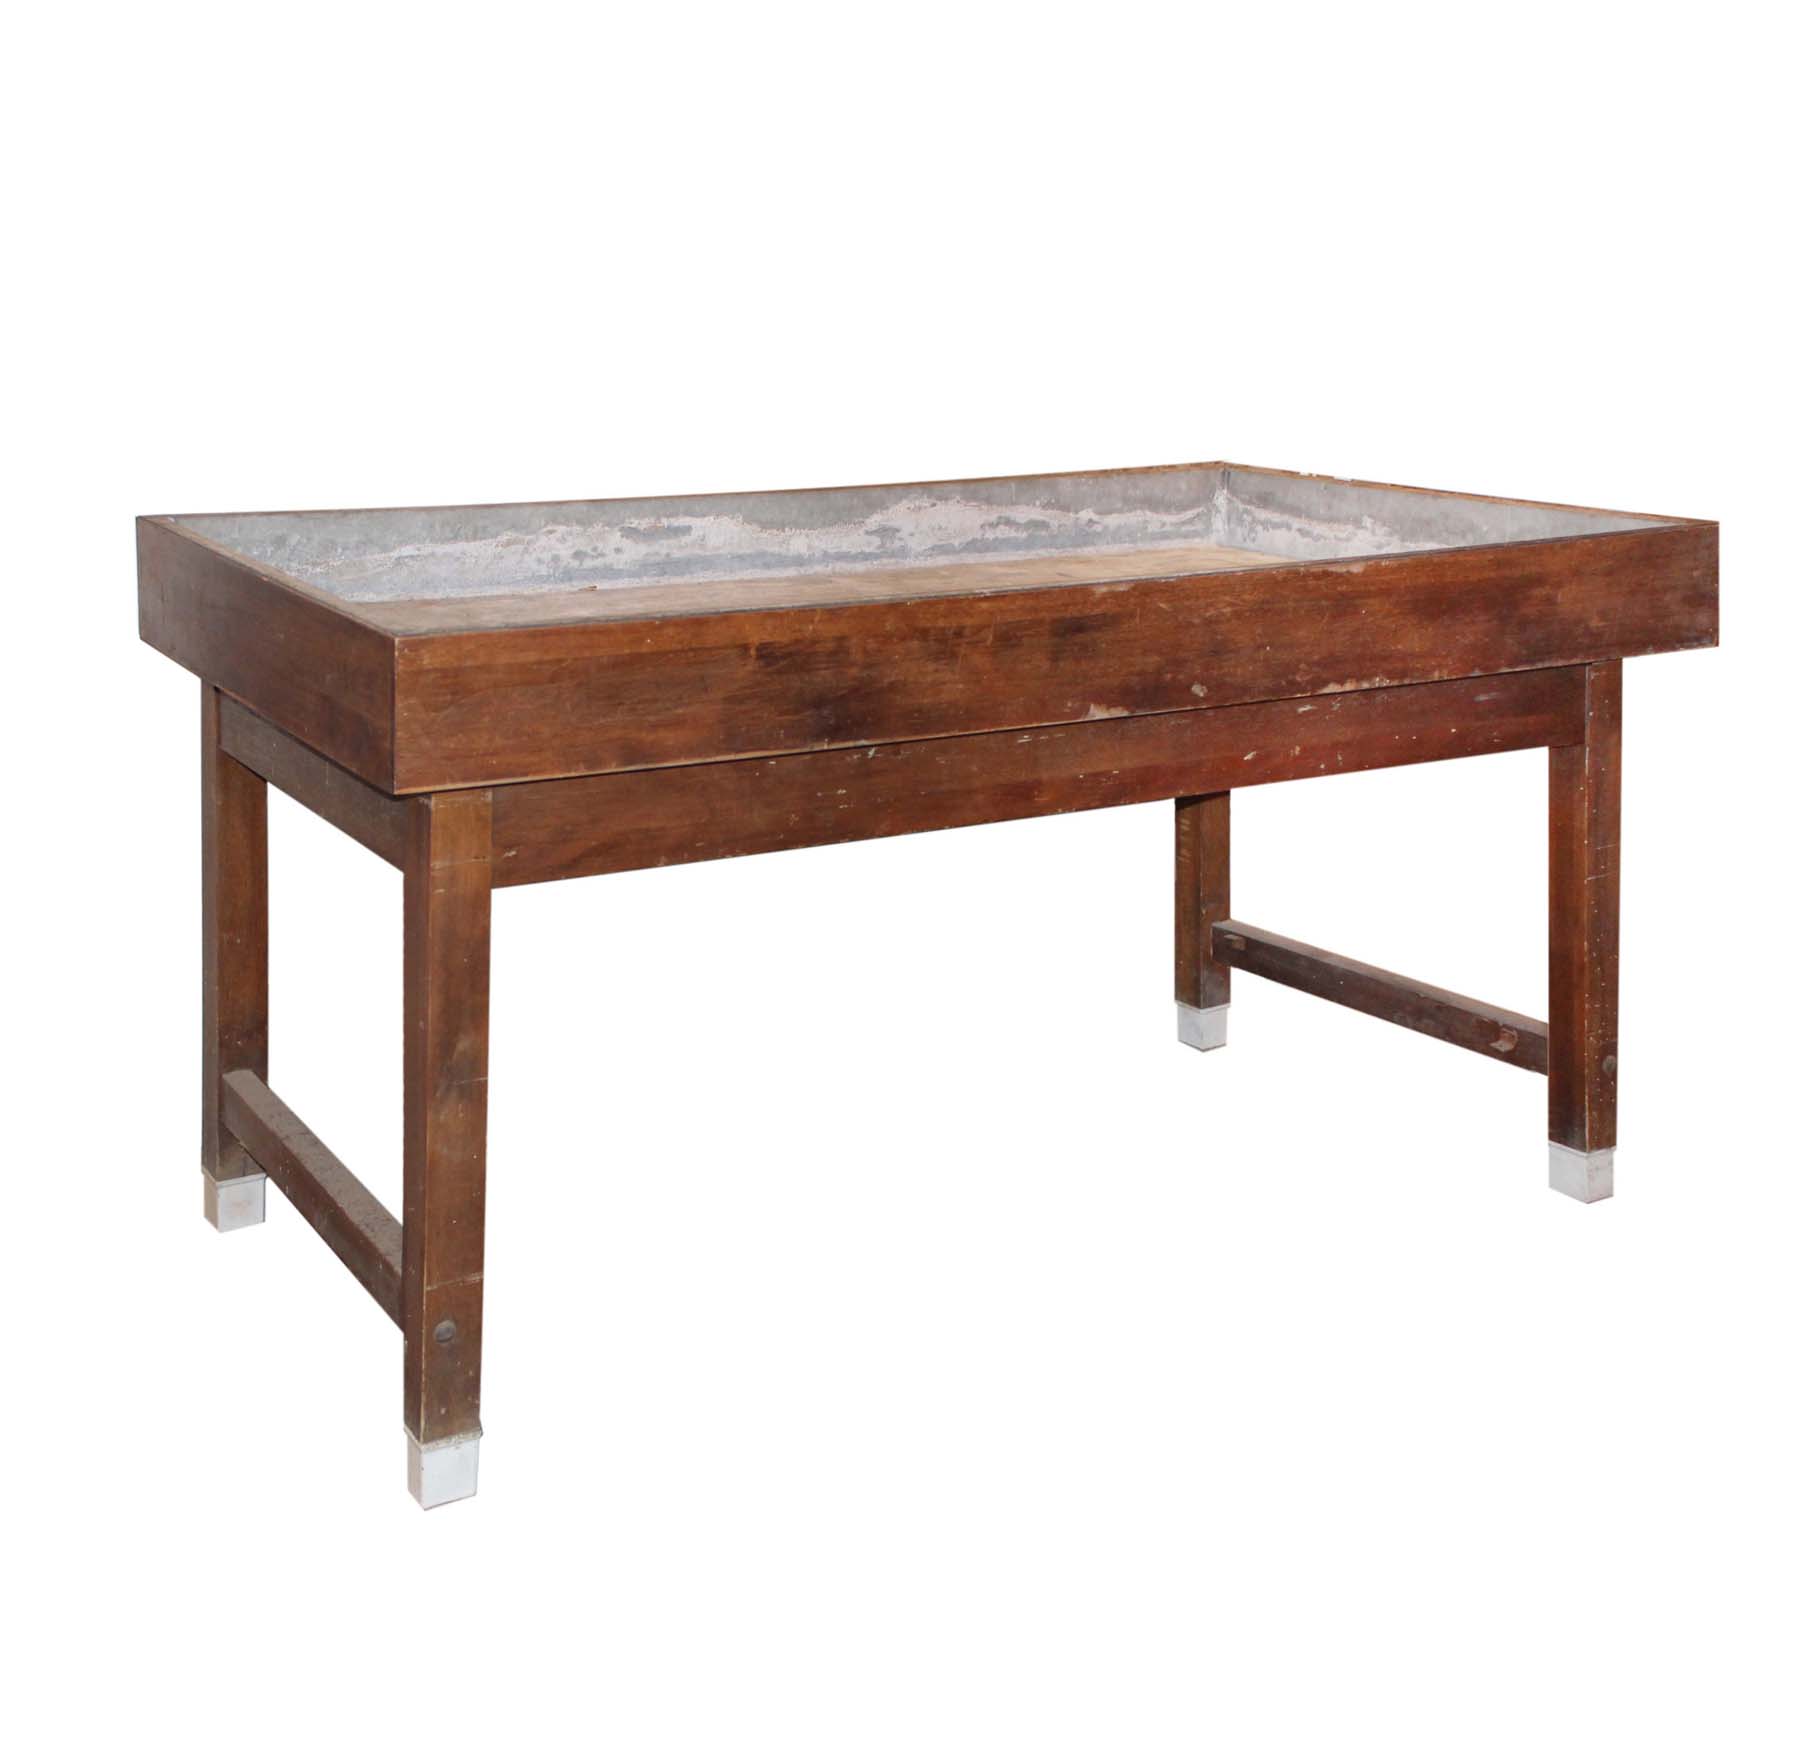 SOLD Large Salvaged Antique Work Table, Wiese Laboratory Furniture Co.-0